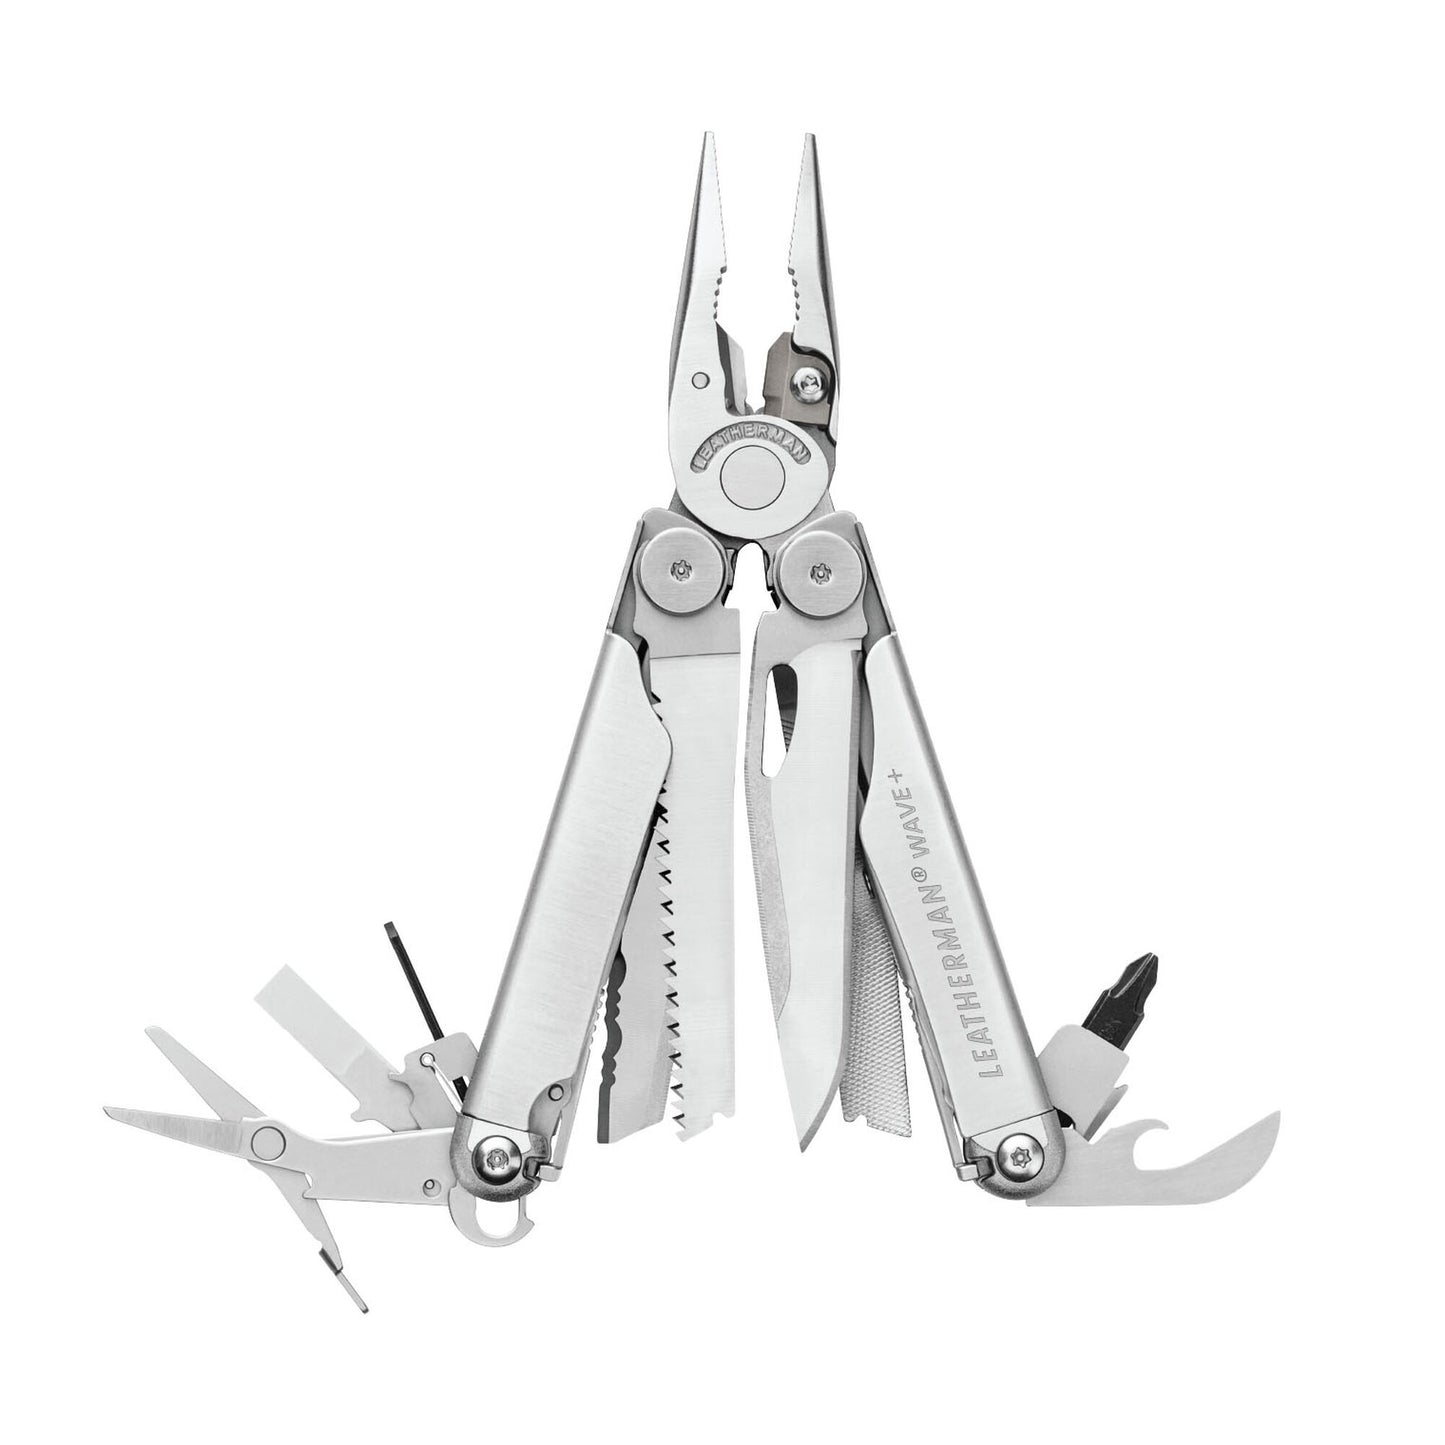 Leatherman Wave plus (Includes Free Engraving)